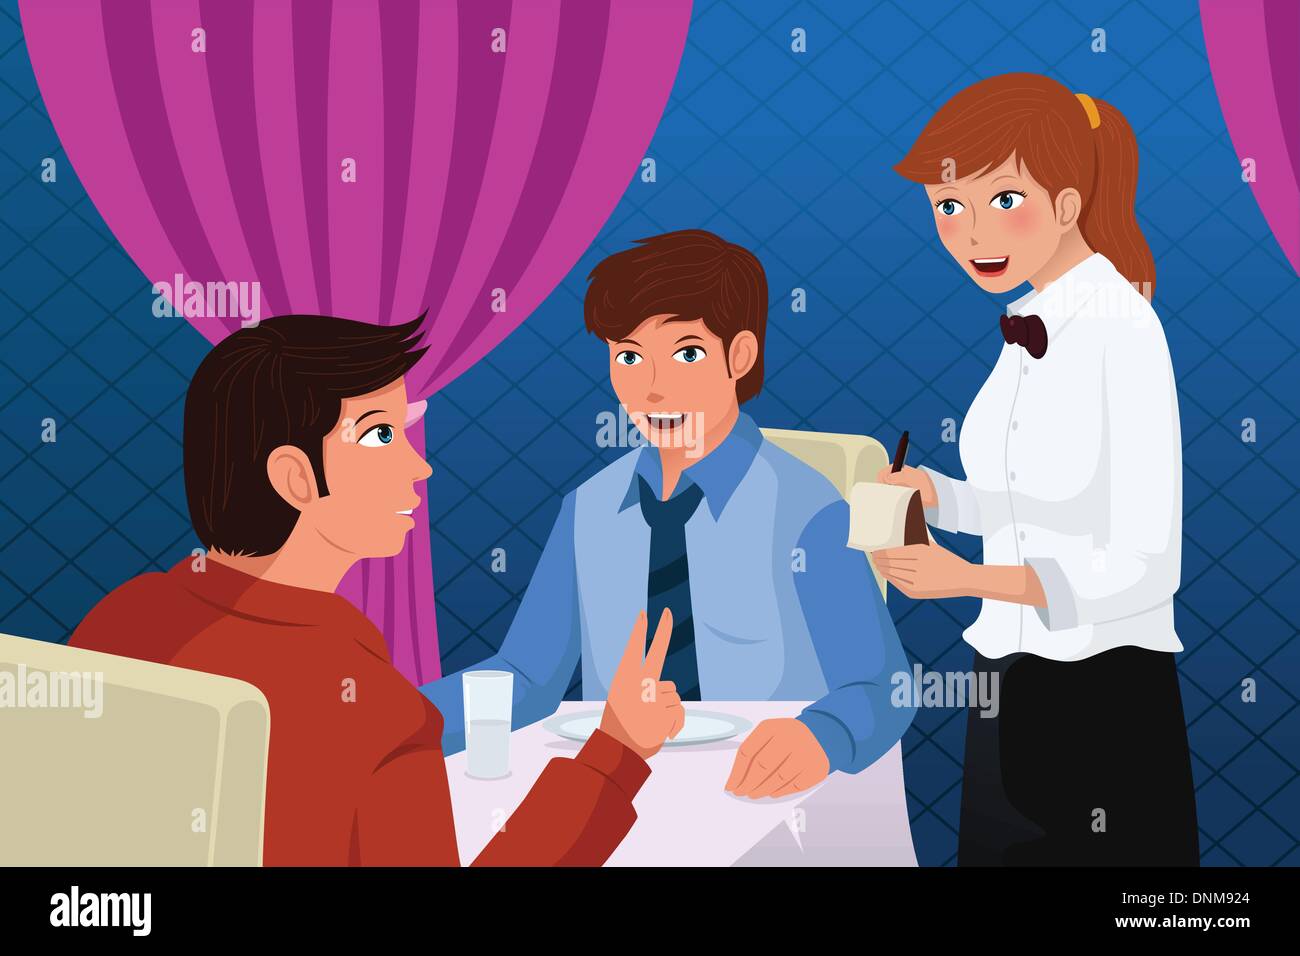 A vector illustration of a waiter in a restaurant serving customers Stock Vector